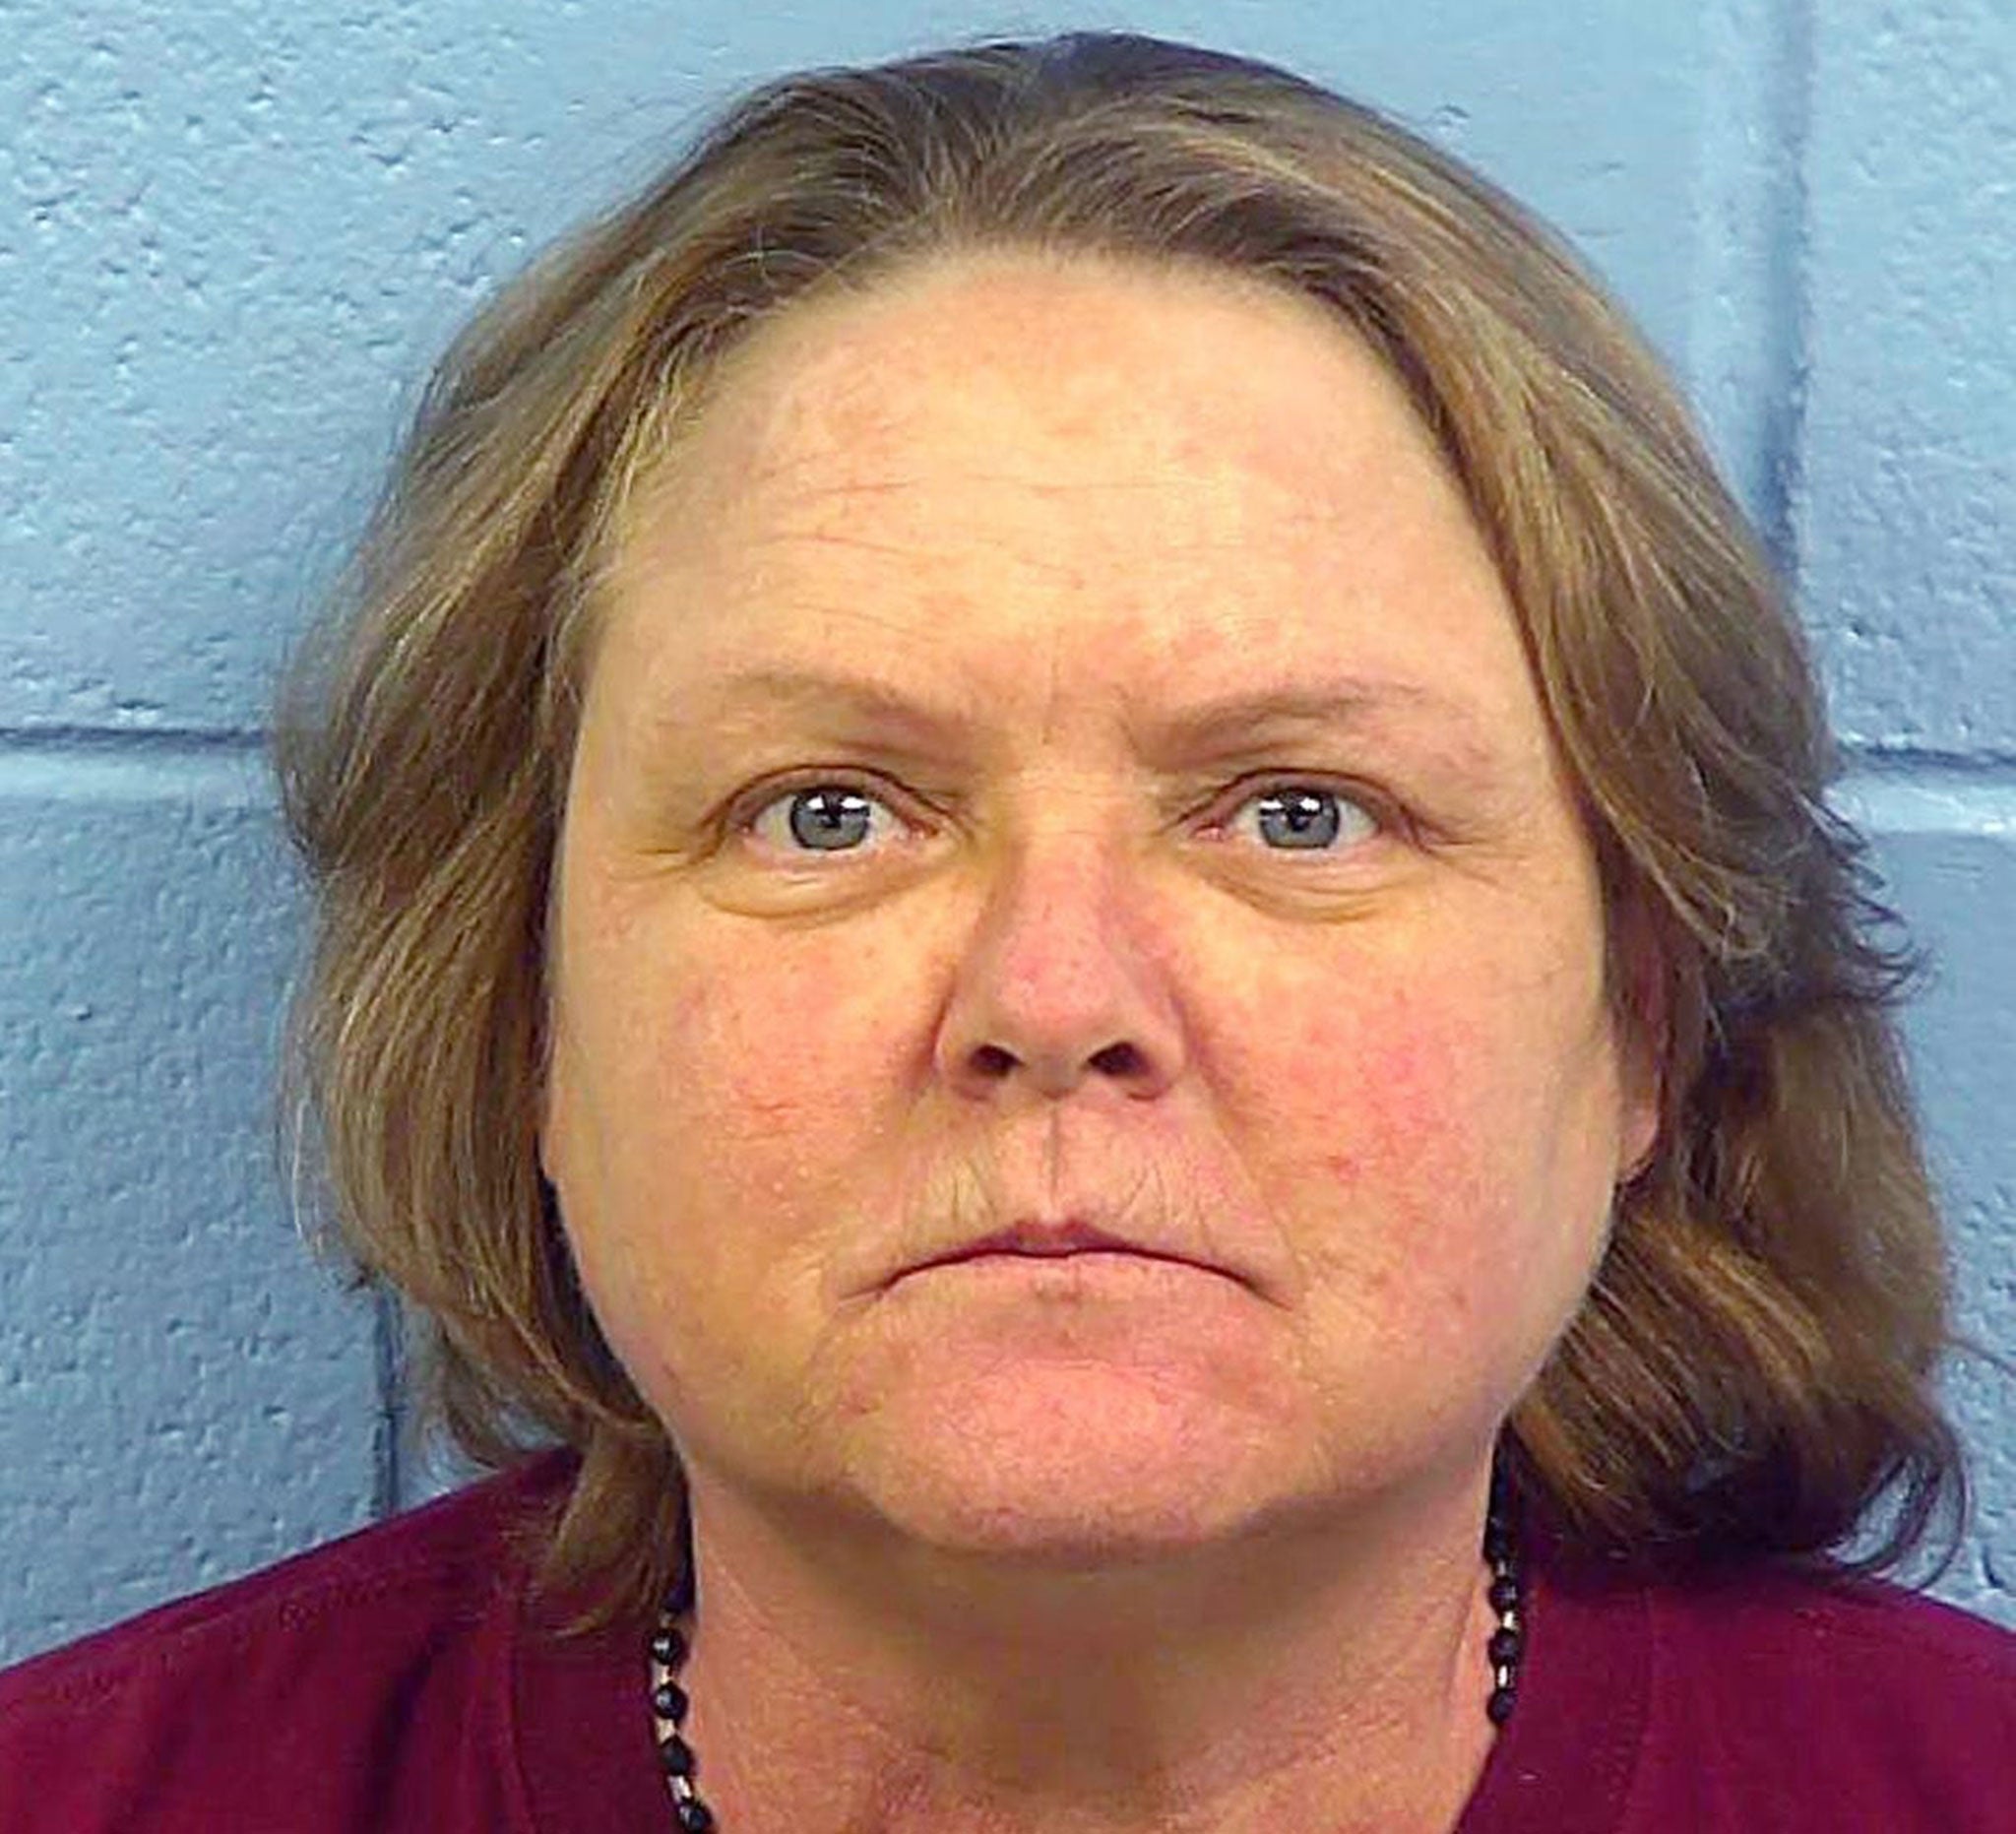 Joyce Hardin Garrard, sentenced to life in prison without parole for the murder of her nine year old granddaughter